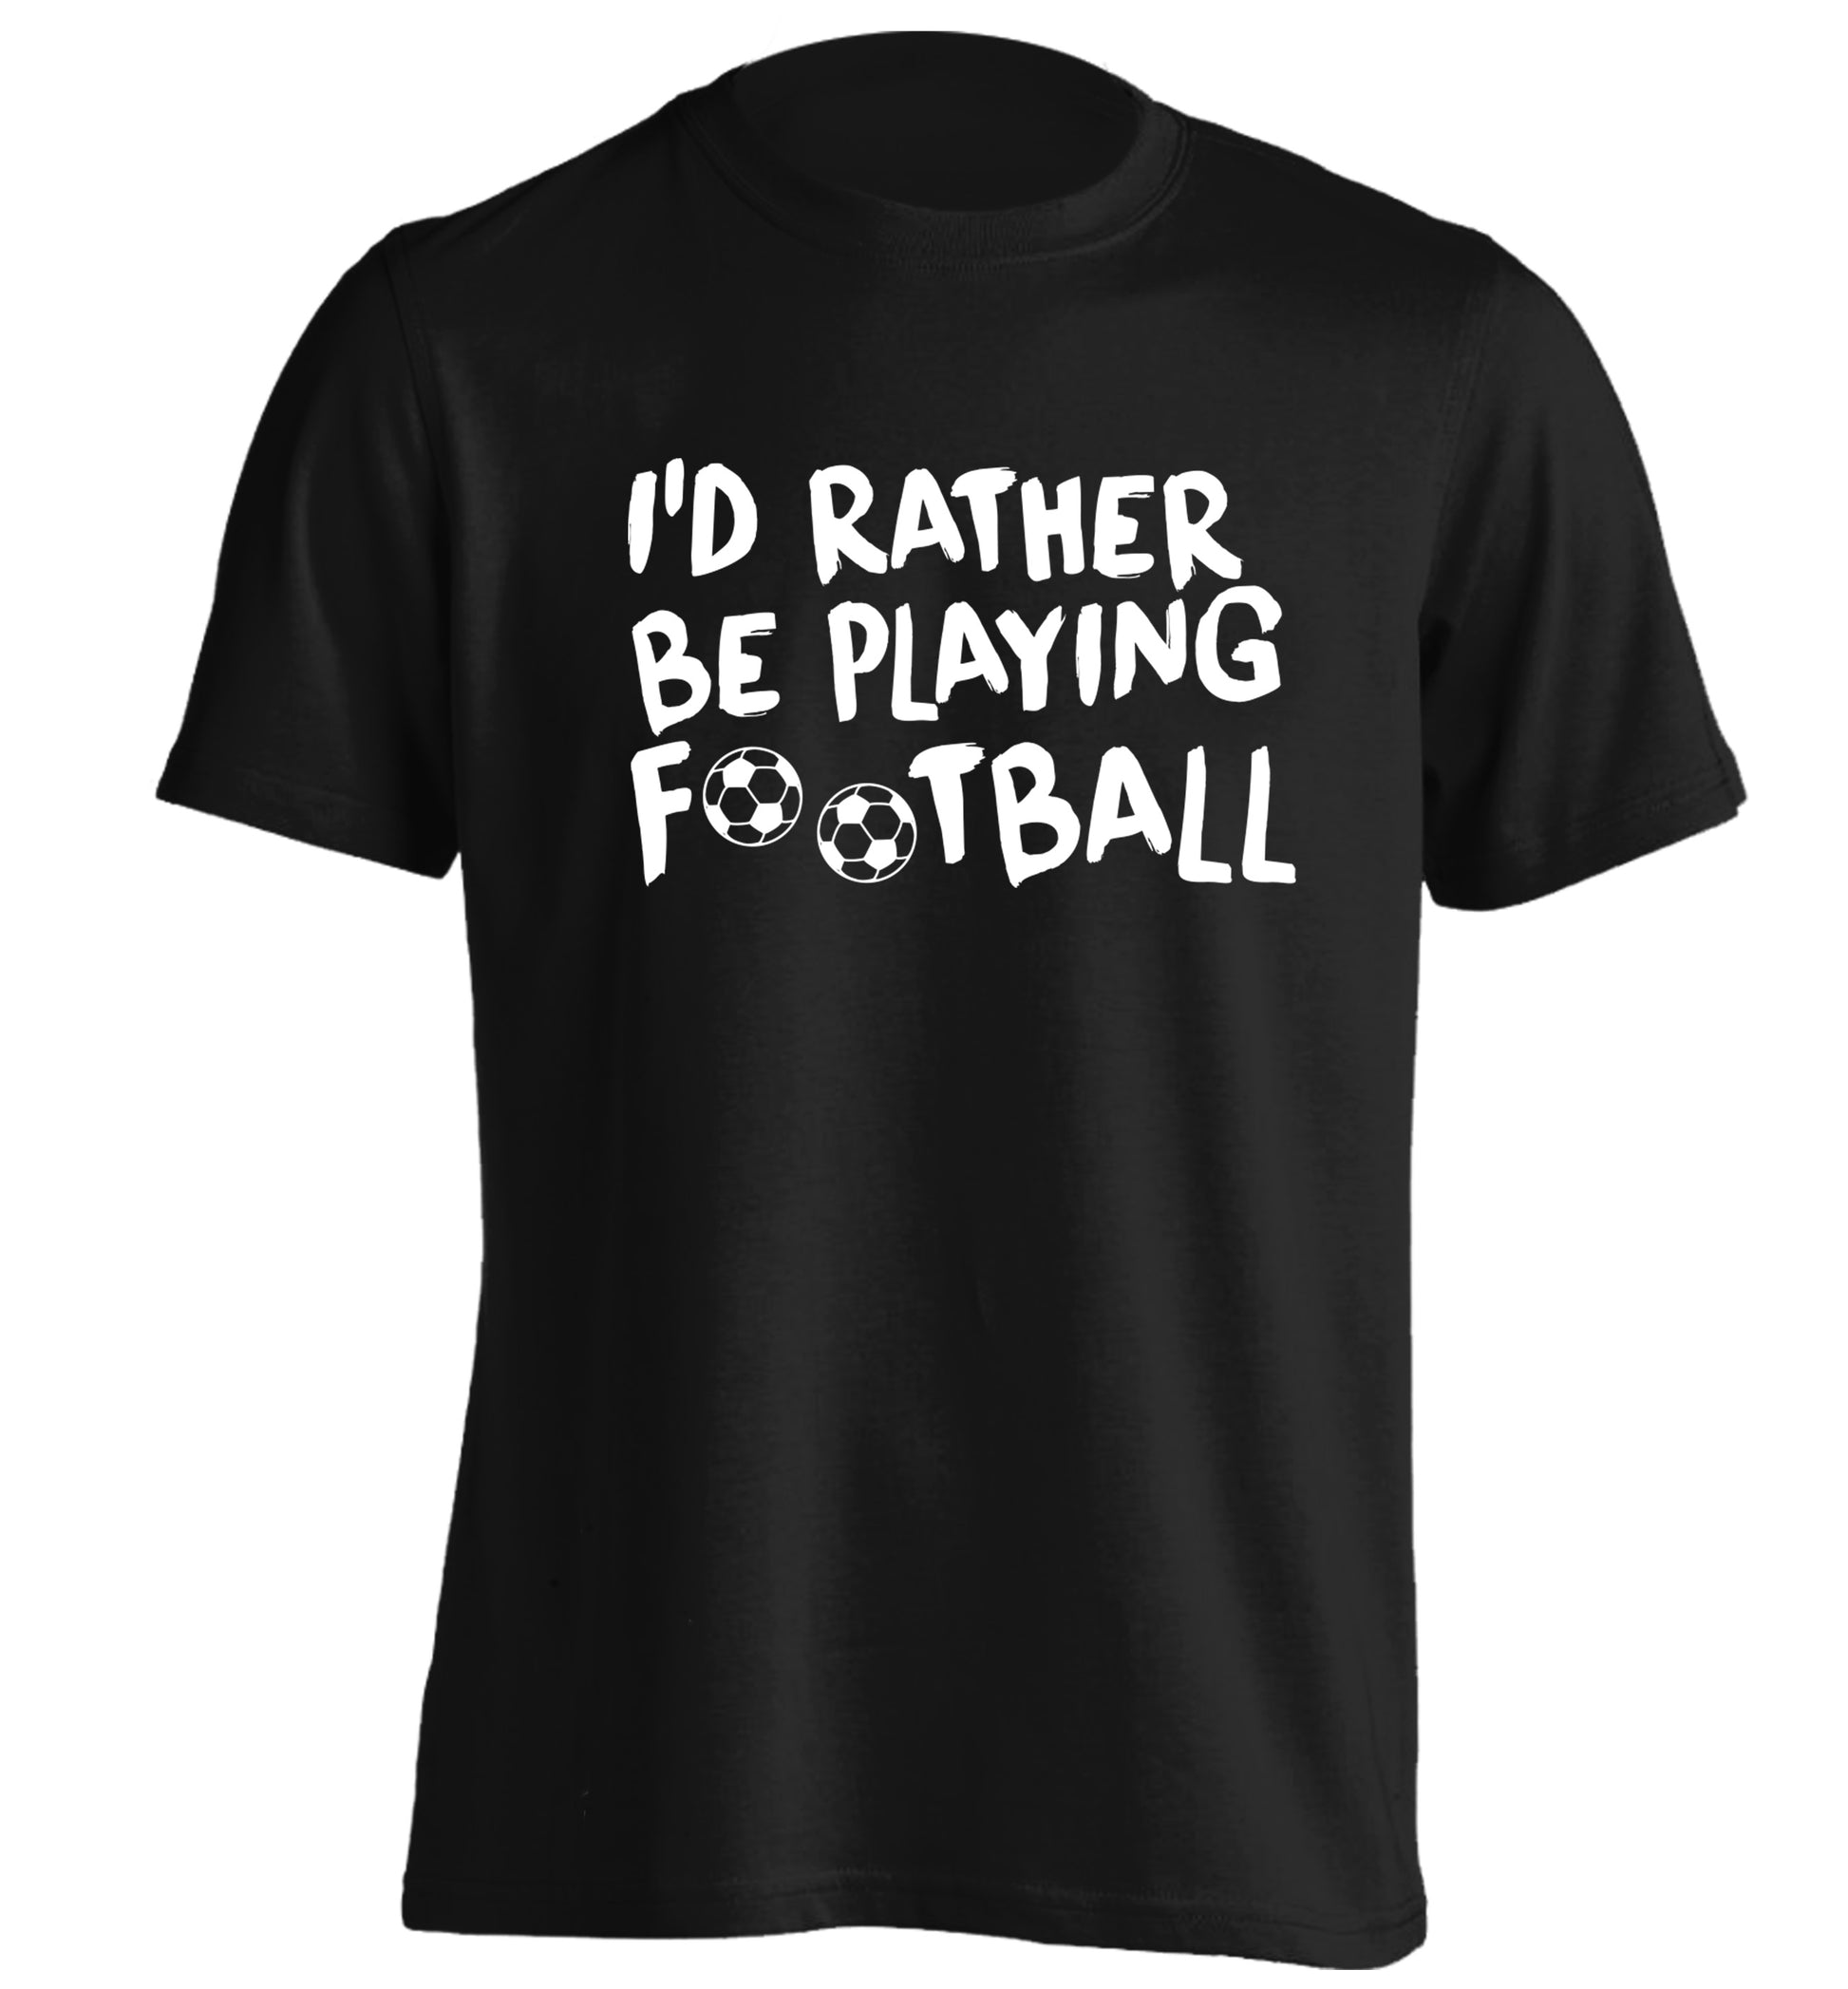 I'd rather be playing football adults unisexblack Tshirt 2XL